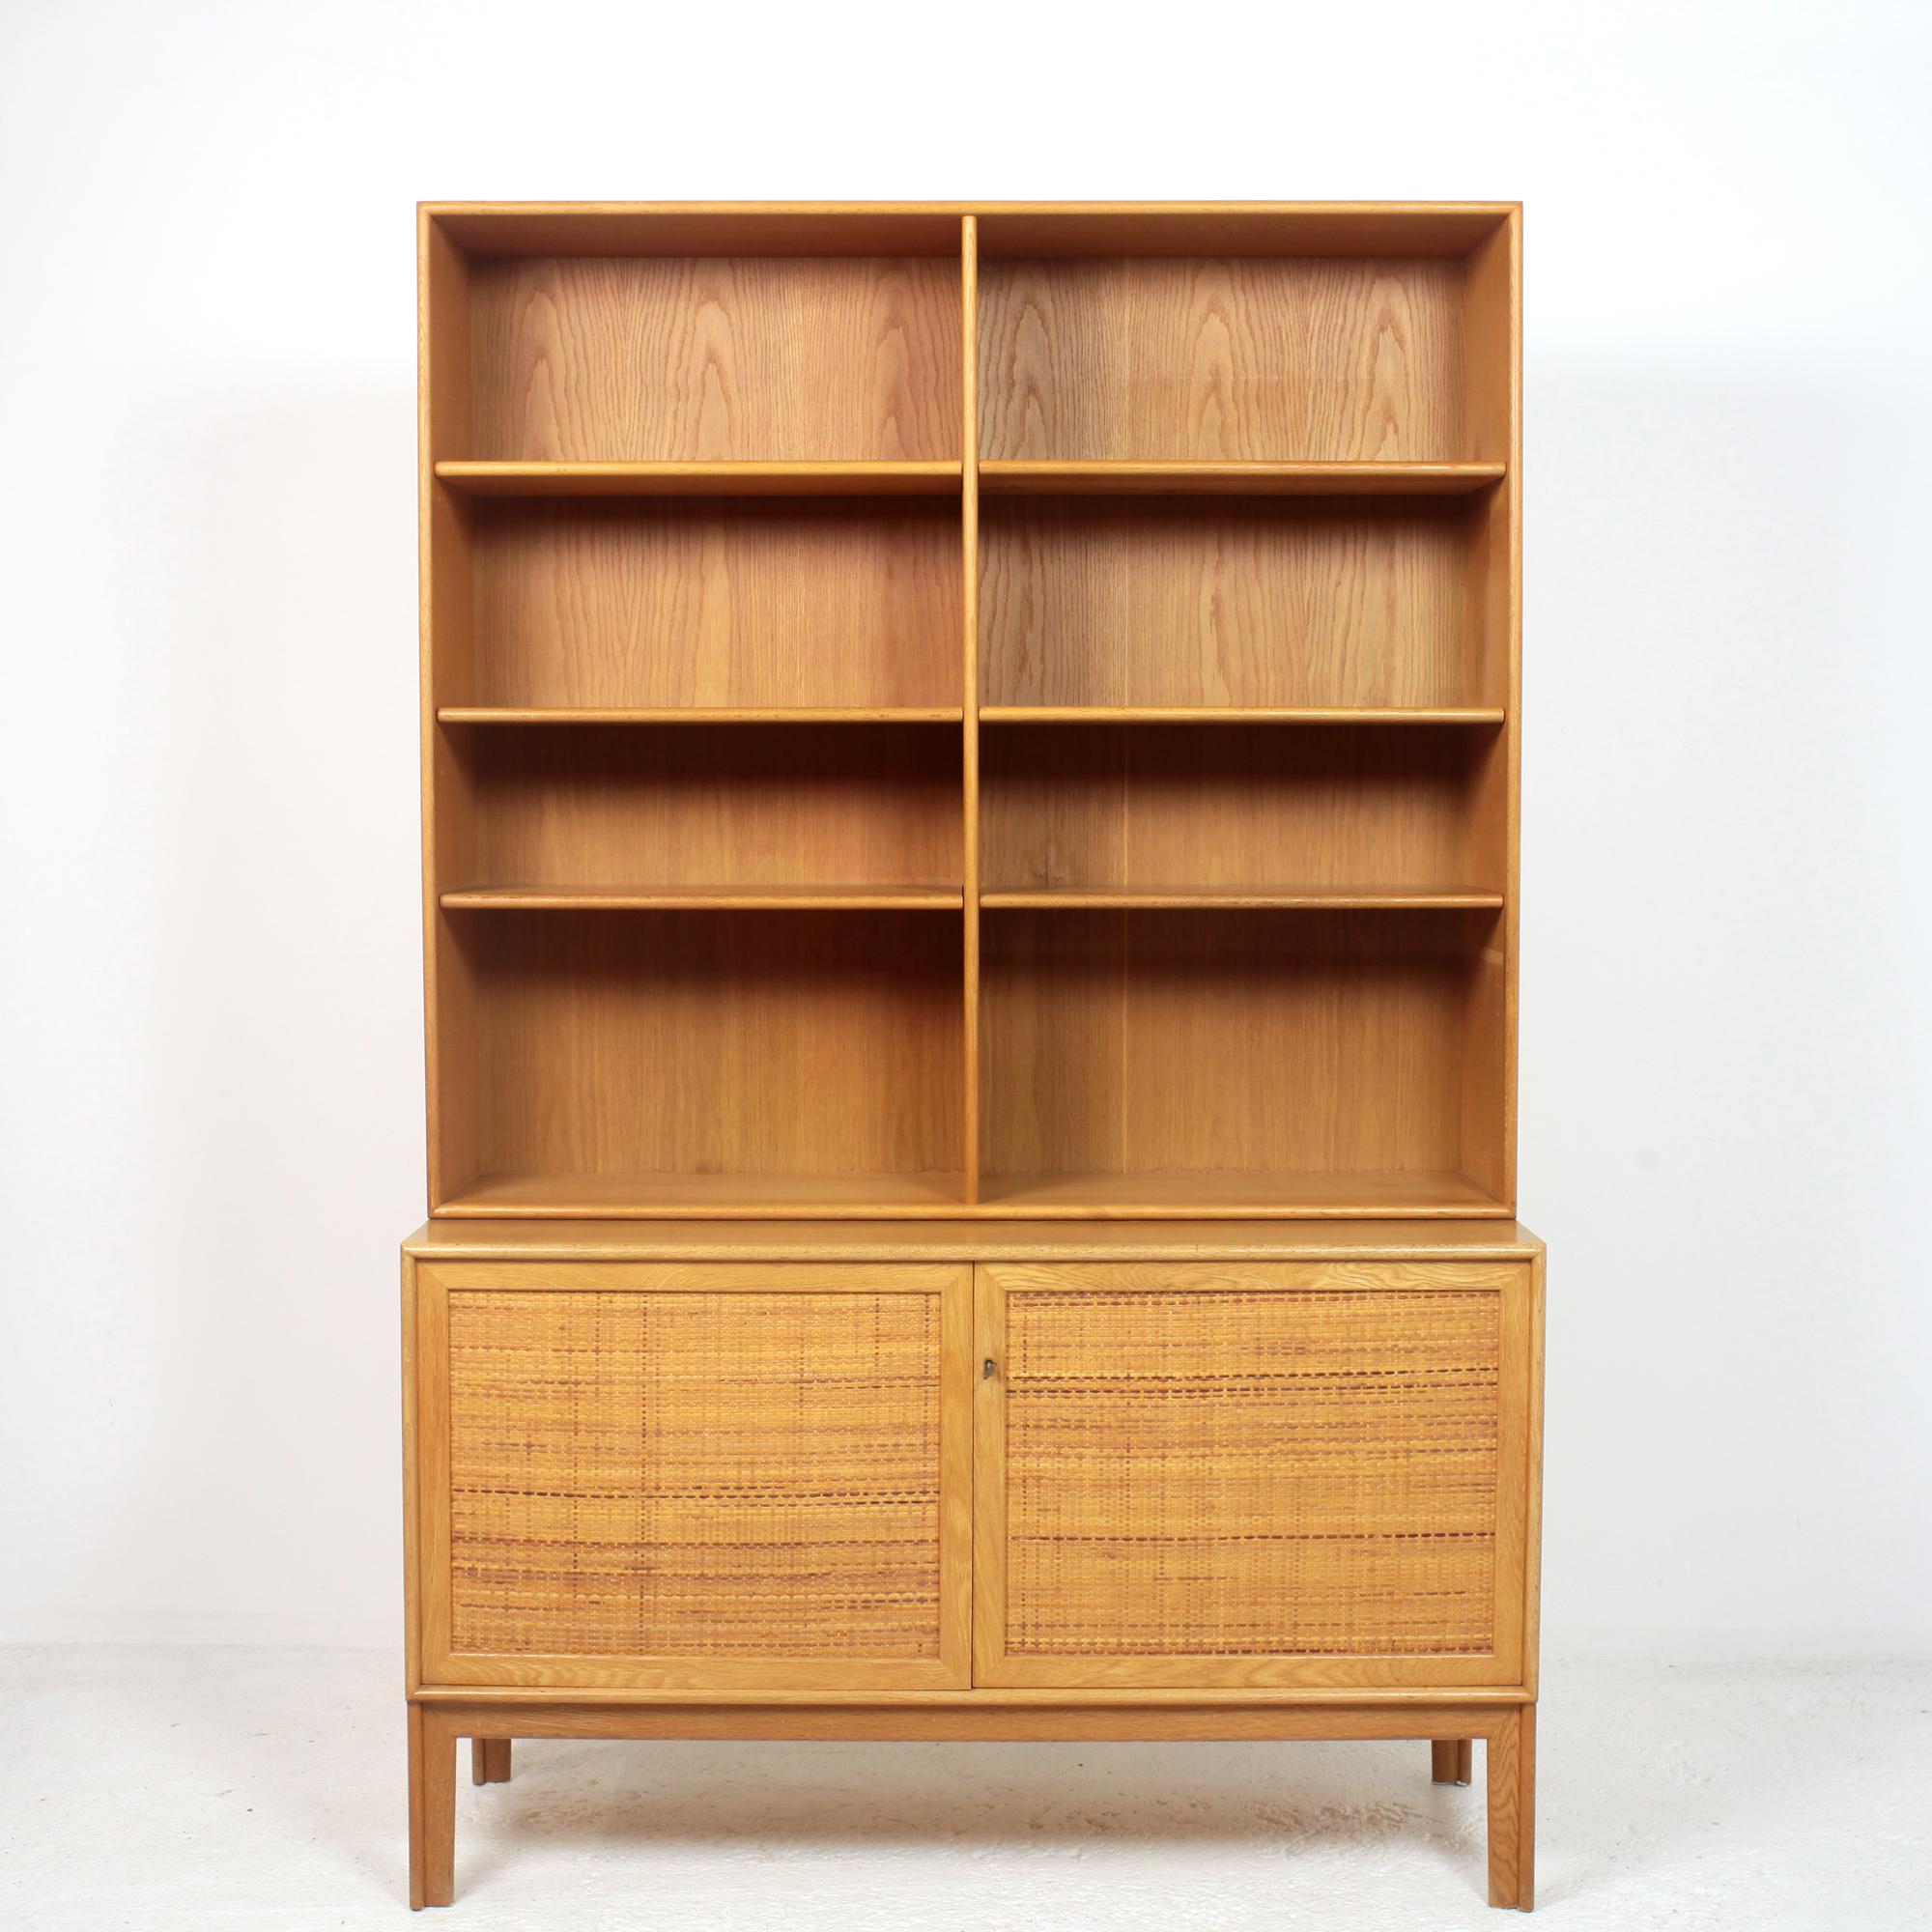 Elegant and very useful sideboard and bookcase model Norrland designed by Alf Svensson produced by Bjästa Möbelfabrik in Sweden 1960's.
The 2 elements can be separate.
Sideboard in oak with door covered with woven rattan and adjustable